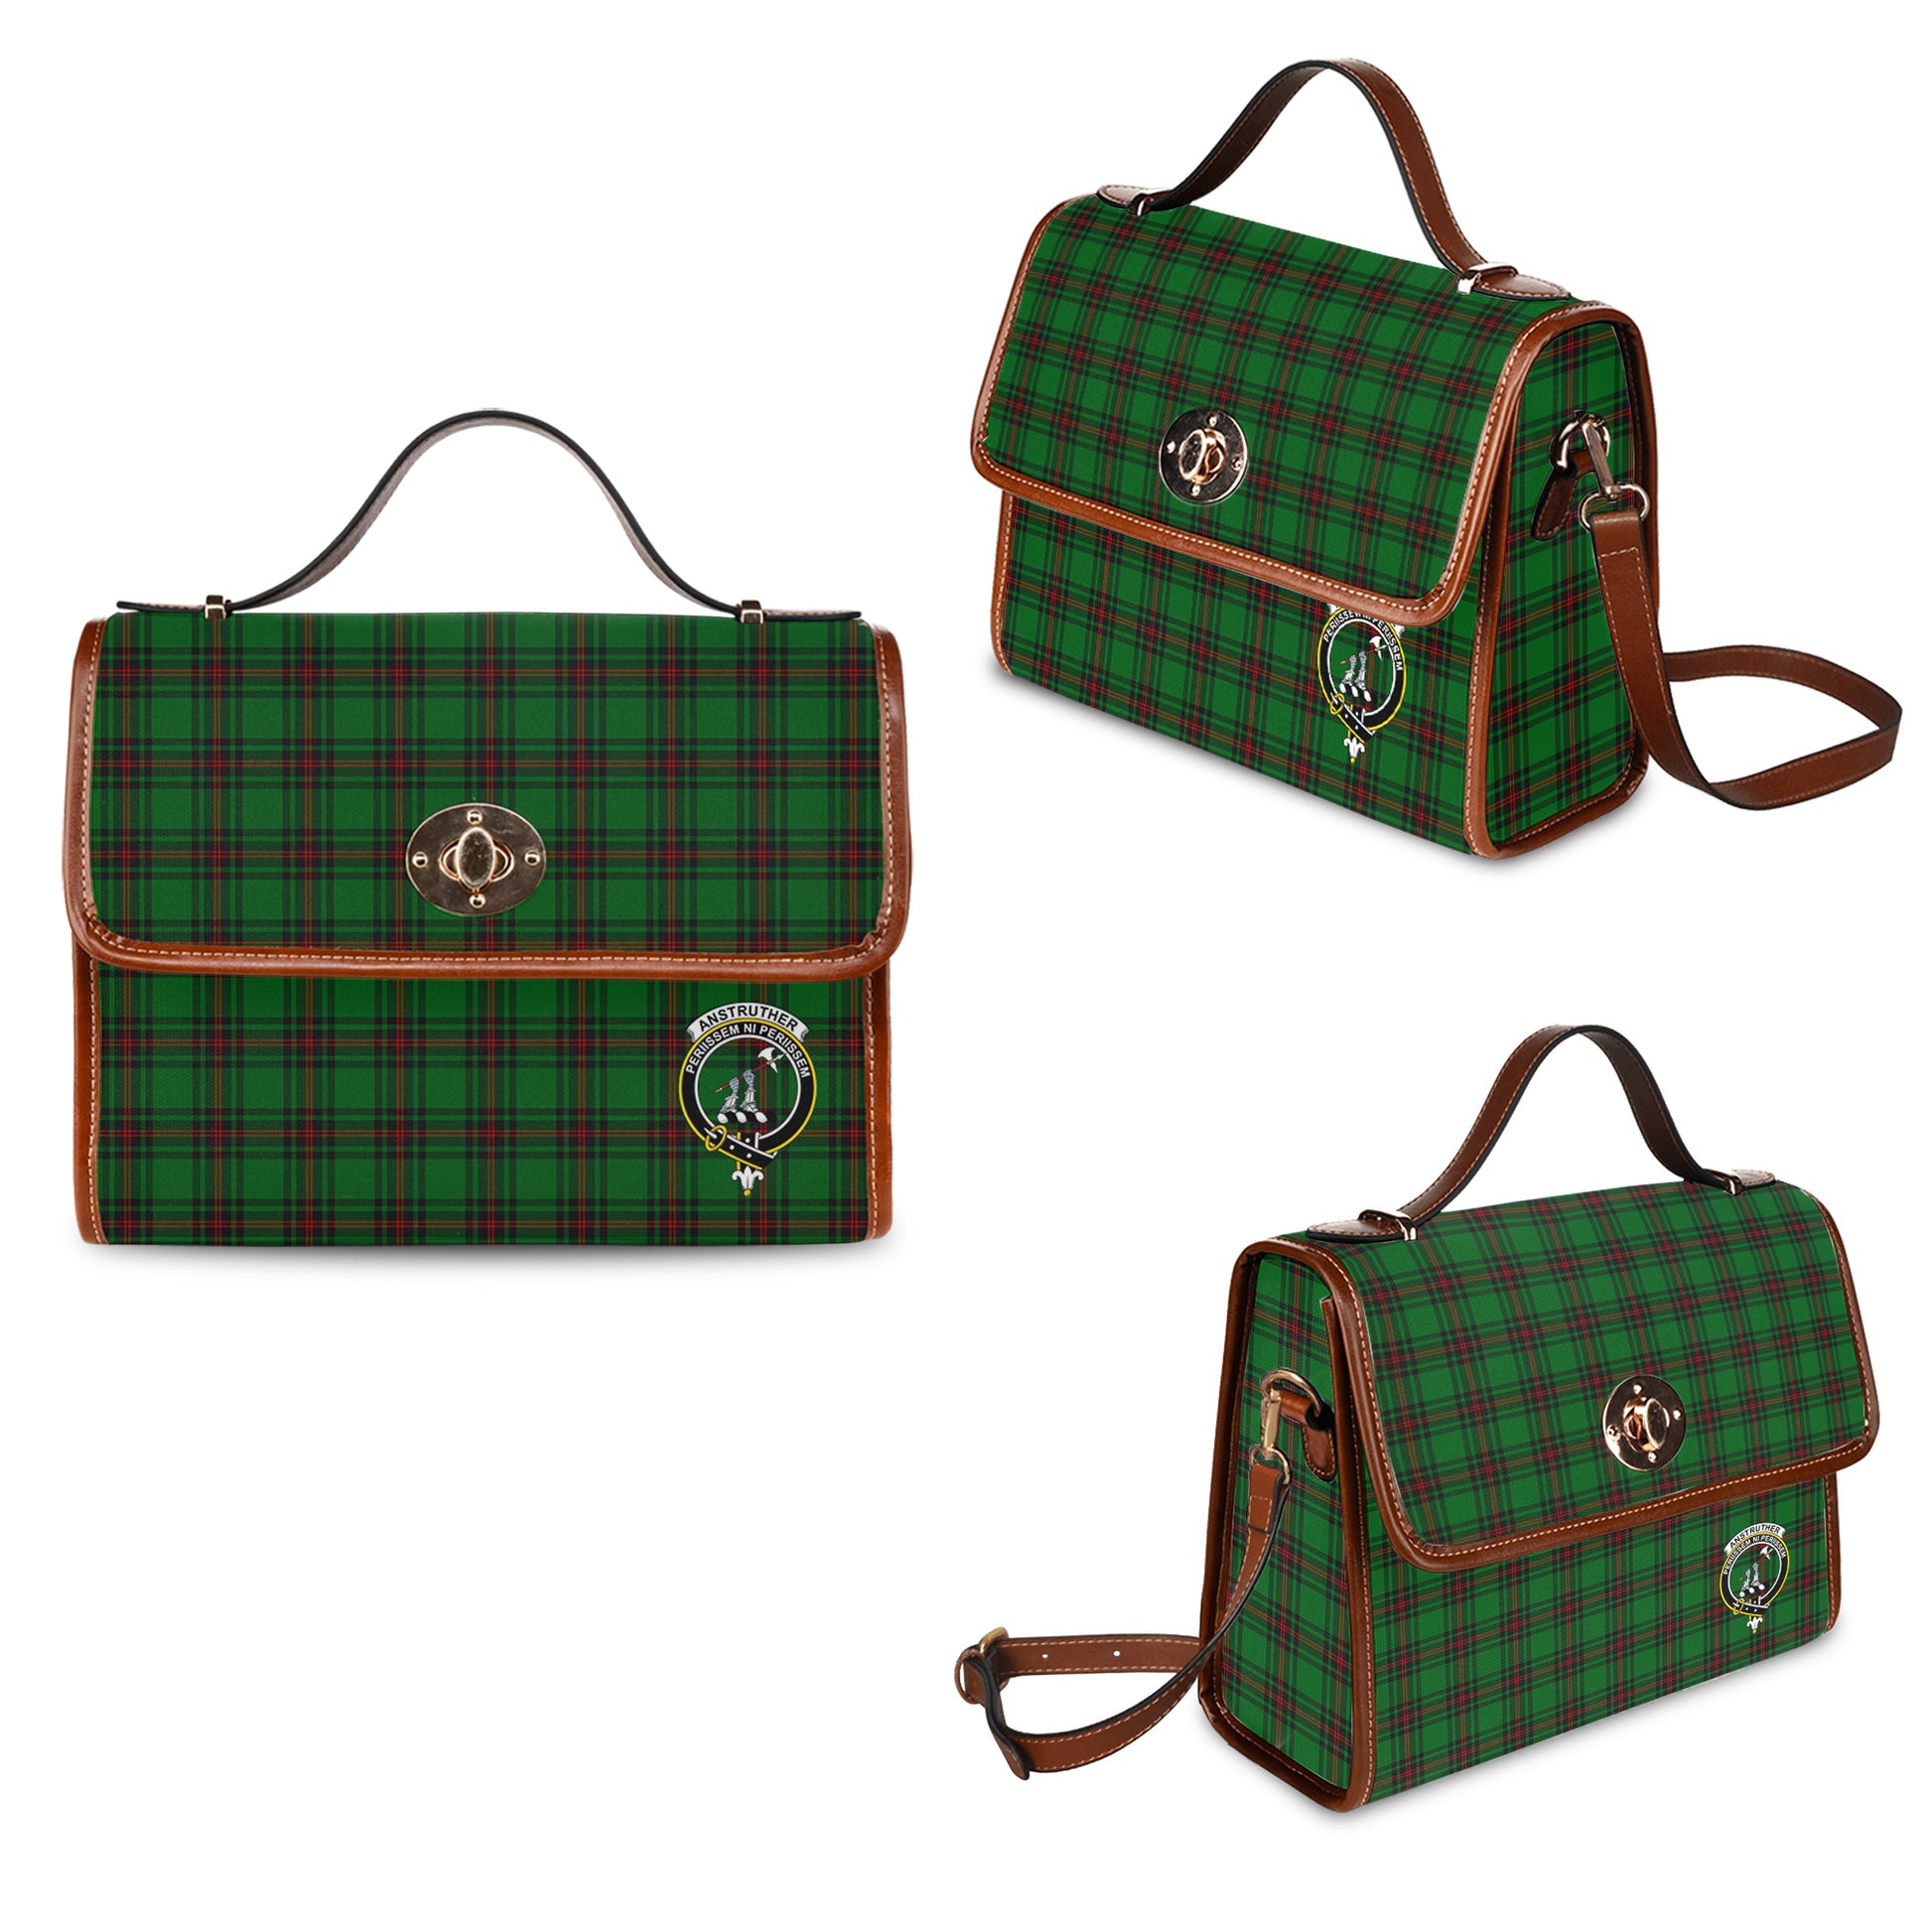 Anstruther Tartan Leather Strap Waterproof Canvas Bag with Family Crest One Size 34cm * 42cm (13.4" x 16.5") - Tartanvibesclothing